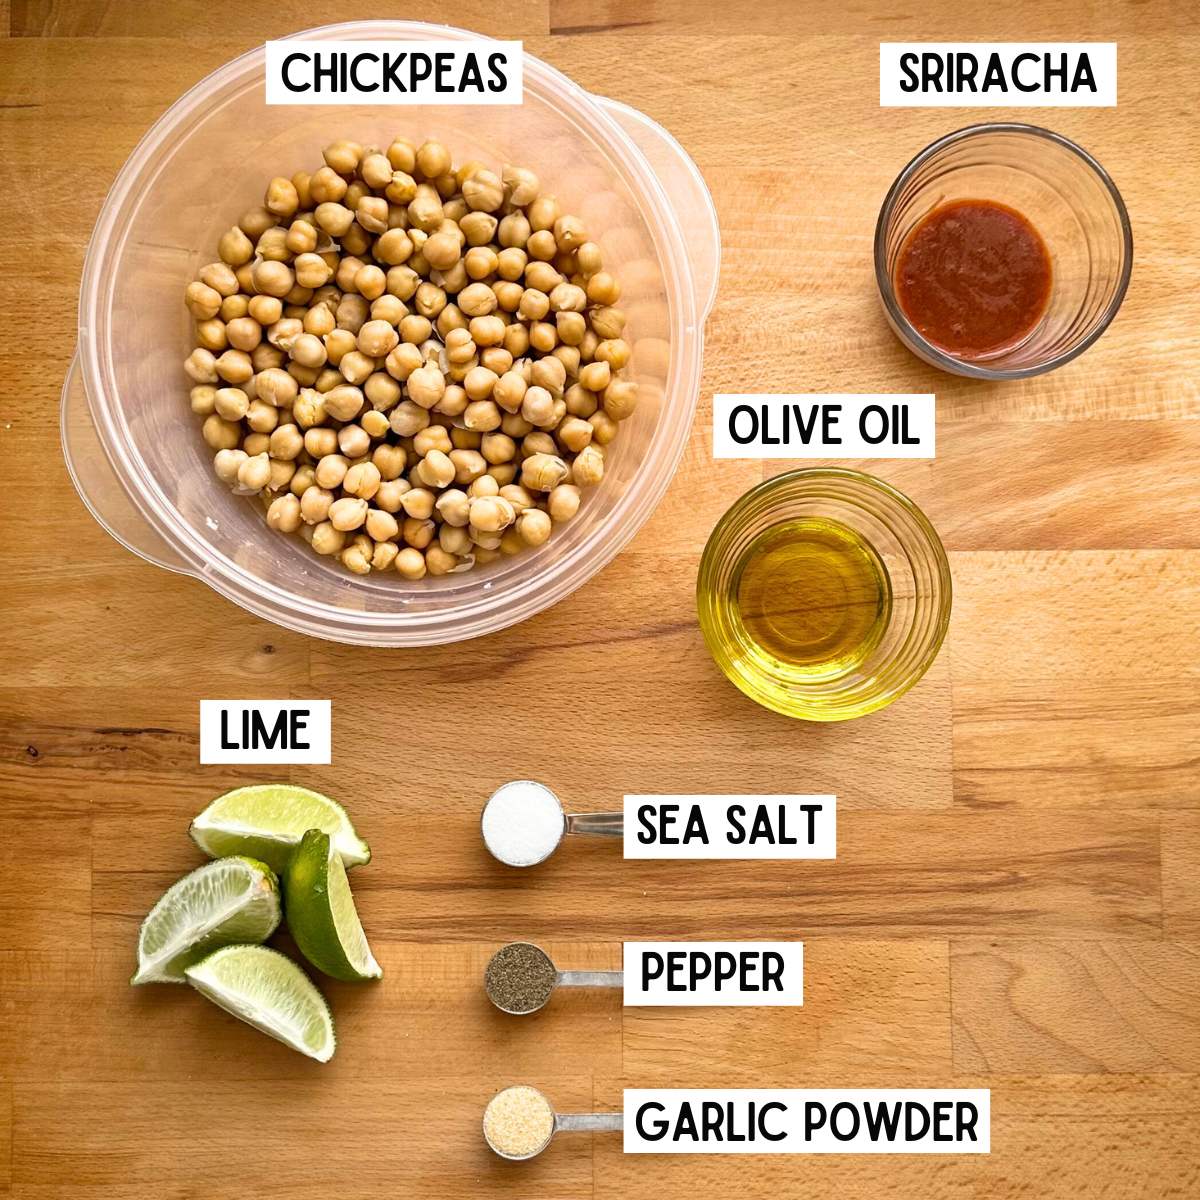 Ingredients needed to make sriracha lime chickpeas with corresponding labels: chickpeas, sriracha, olive oil, lime, sea salt, pepper, and garlic powder.